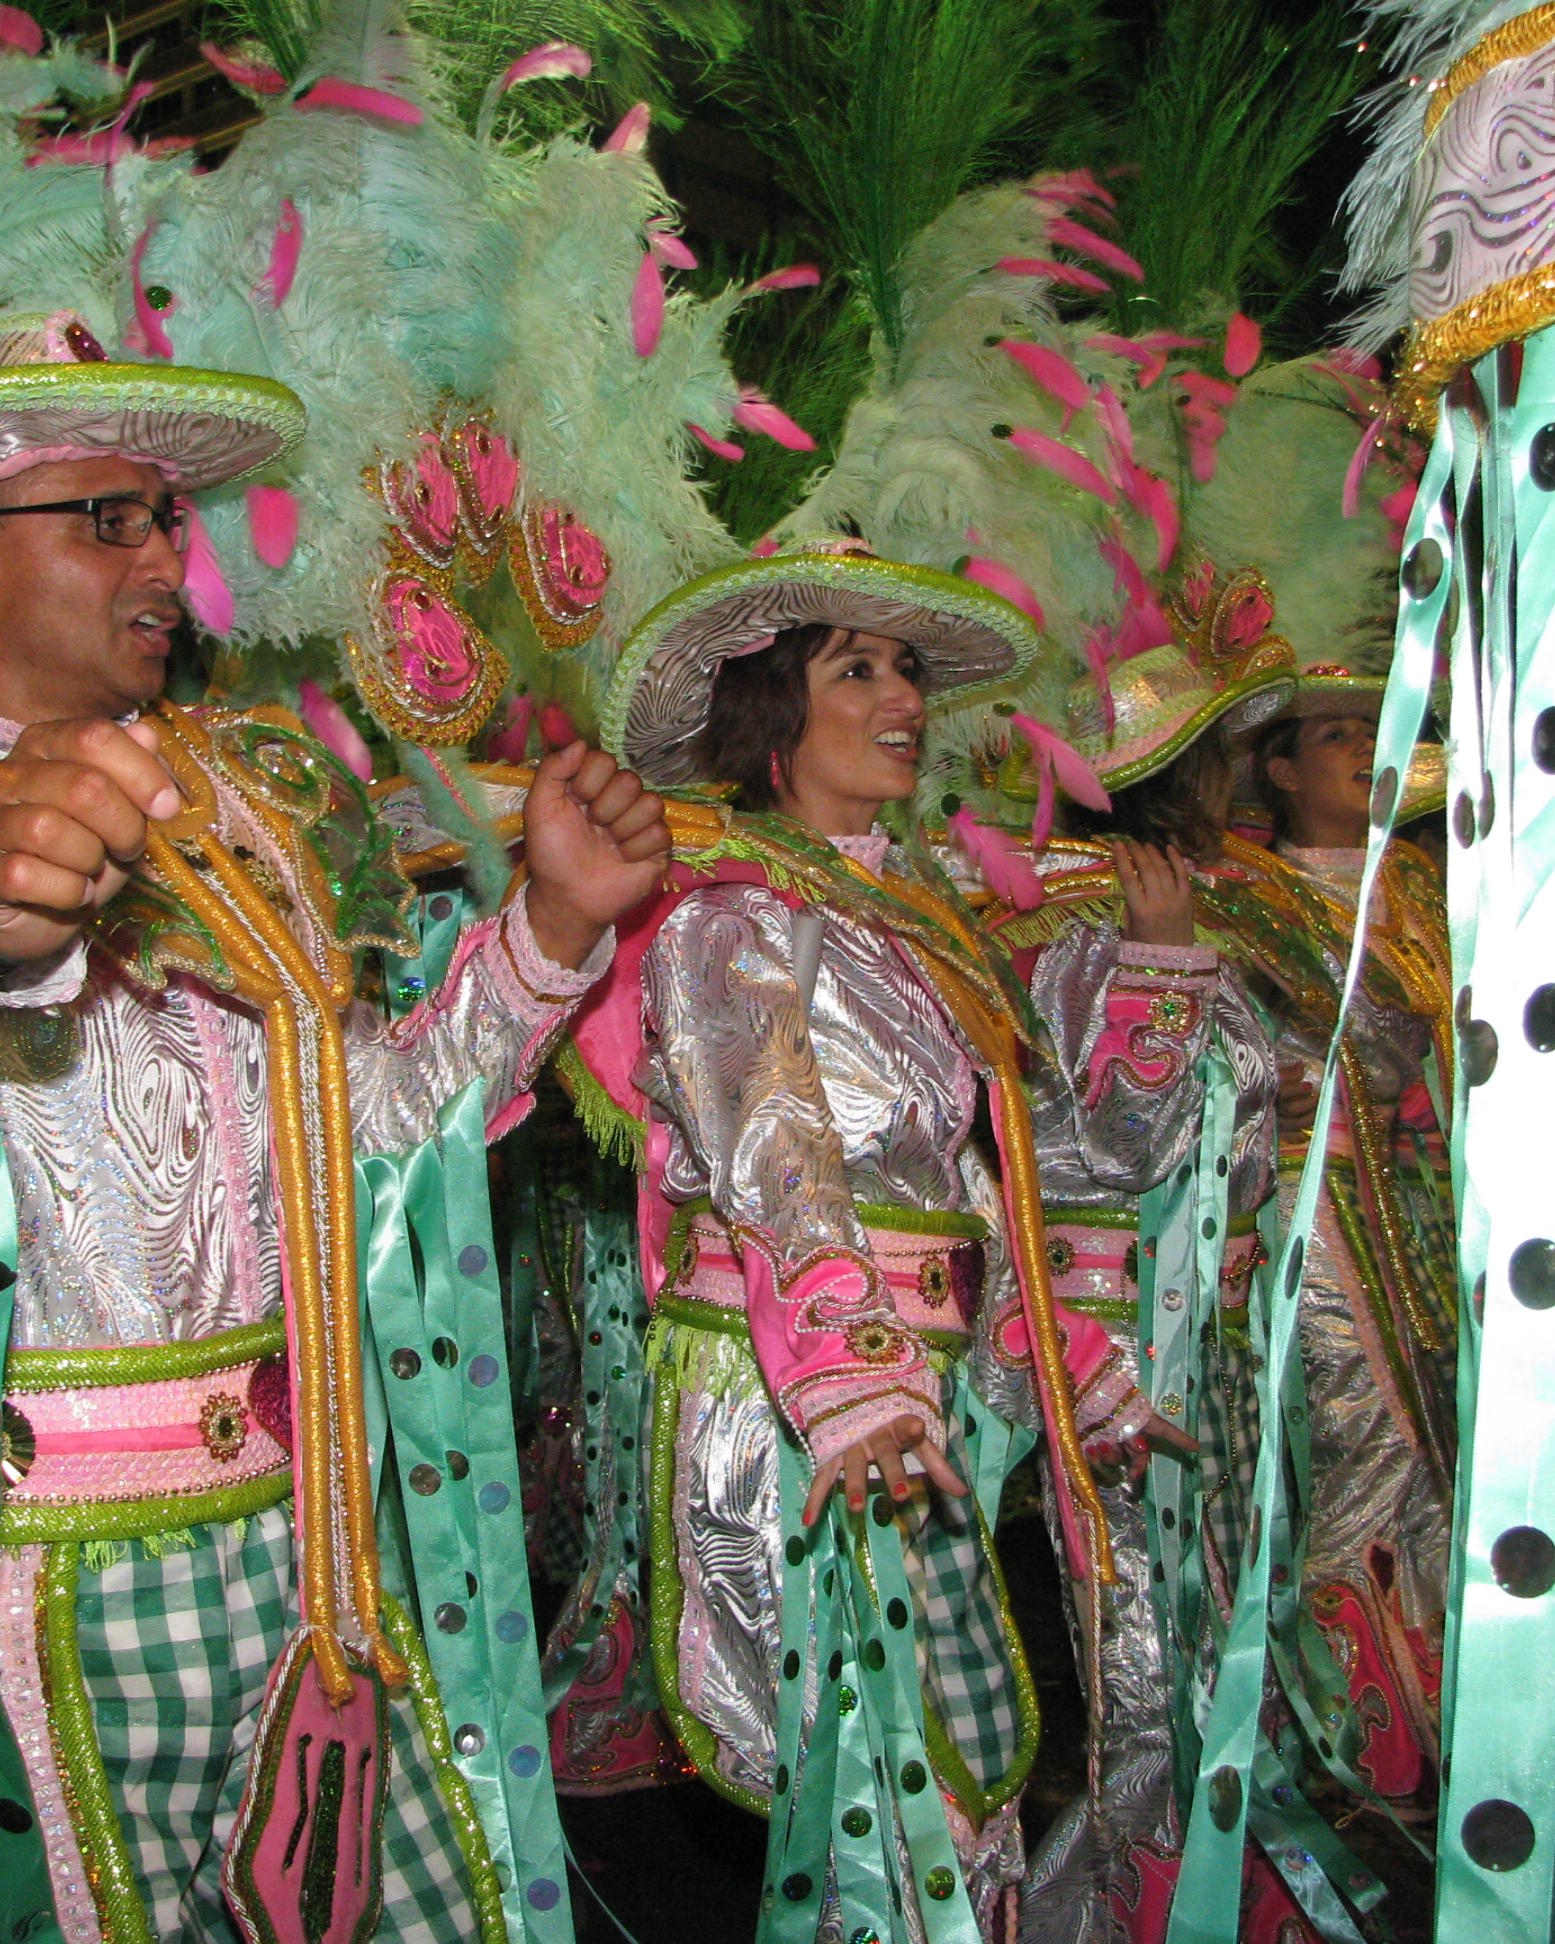 men and women in colorful costumes and hair